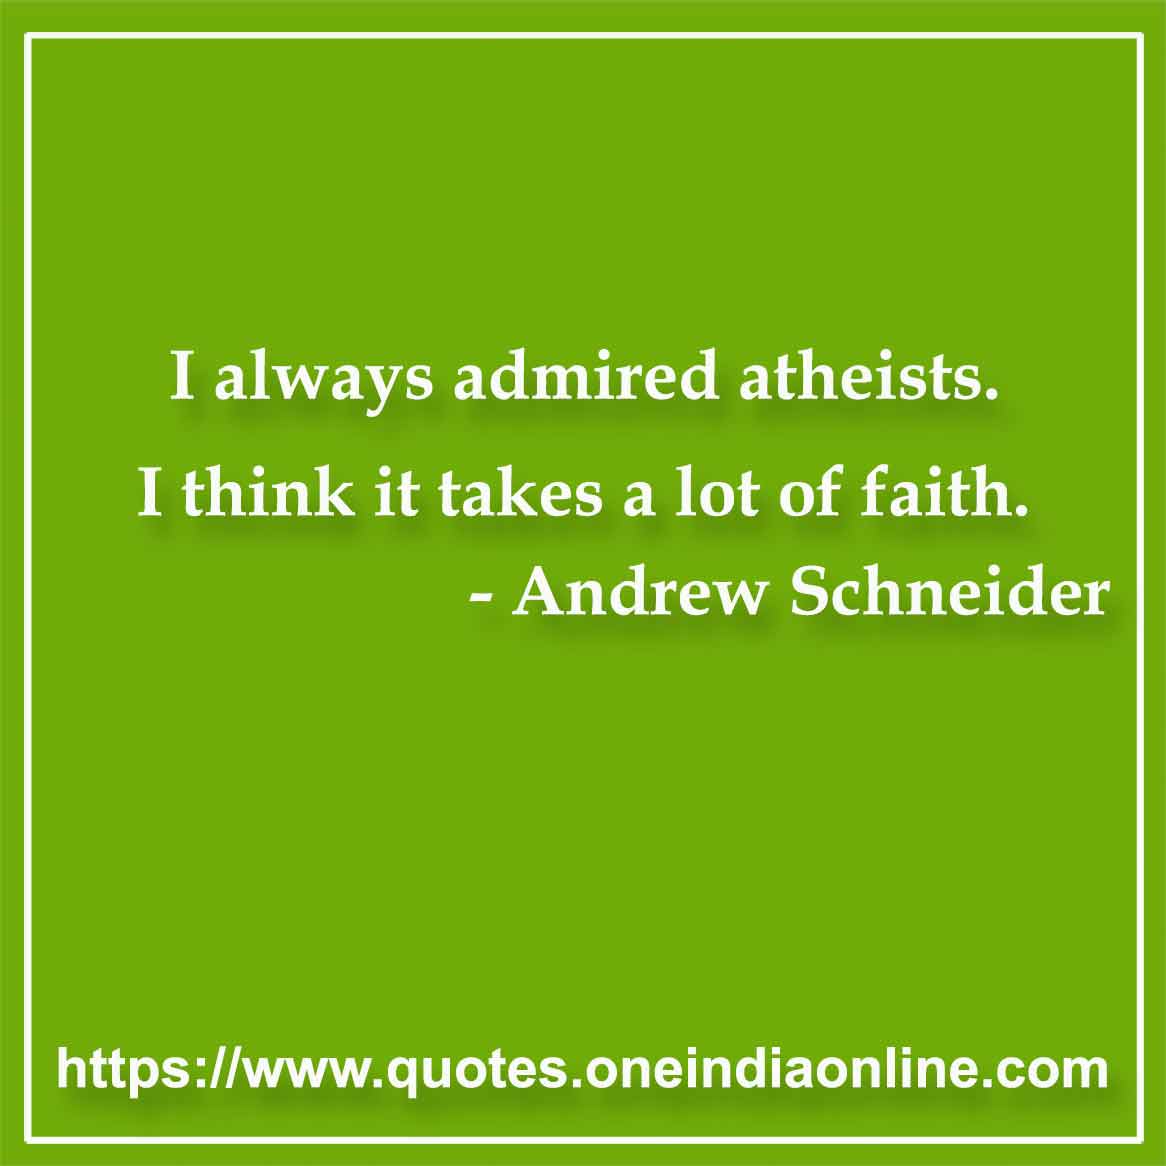 I always admired atheists. I think it takes a lot of faith.

- Faith Quotes by Diane Frolov and Andrew Schneider